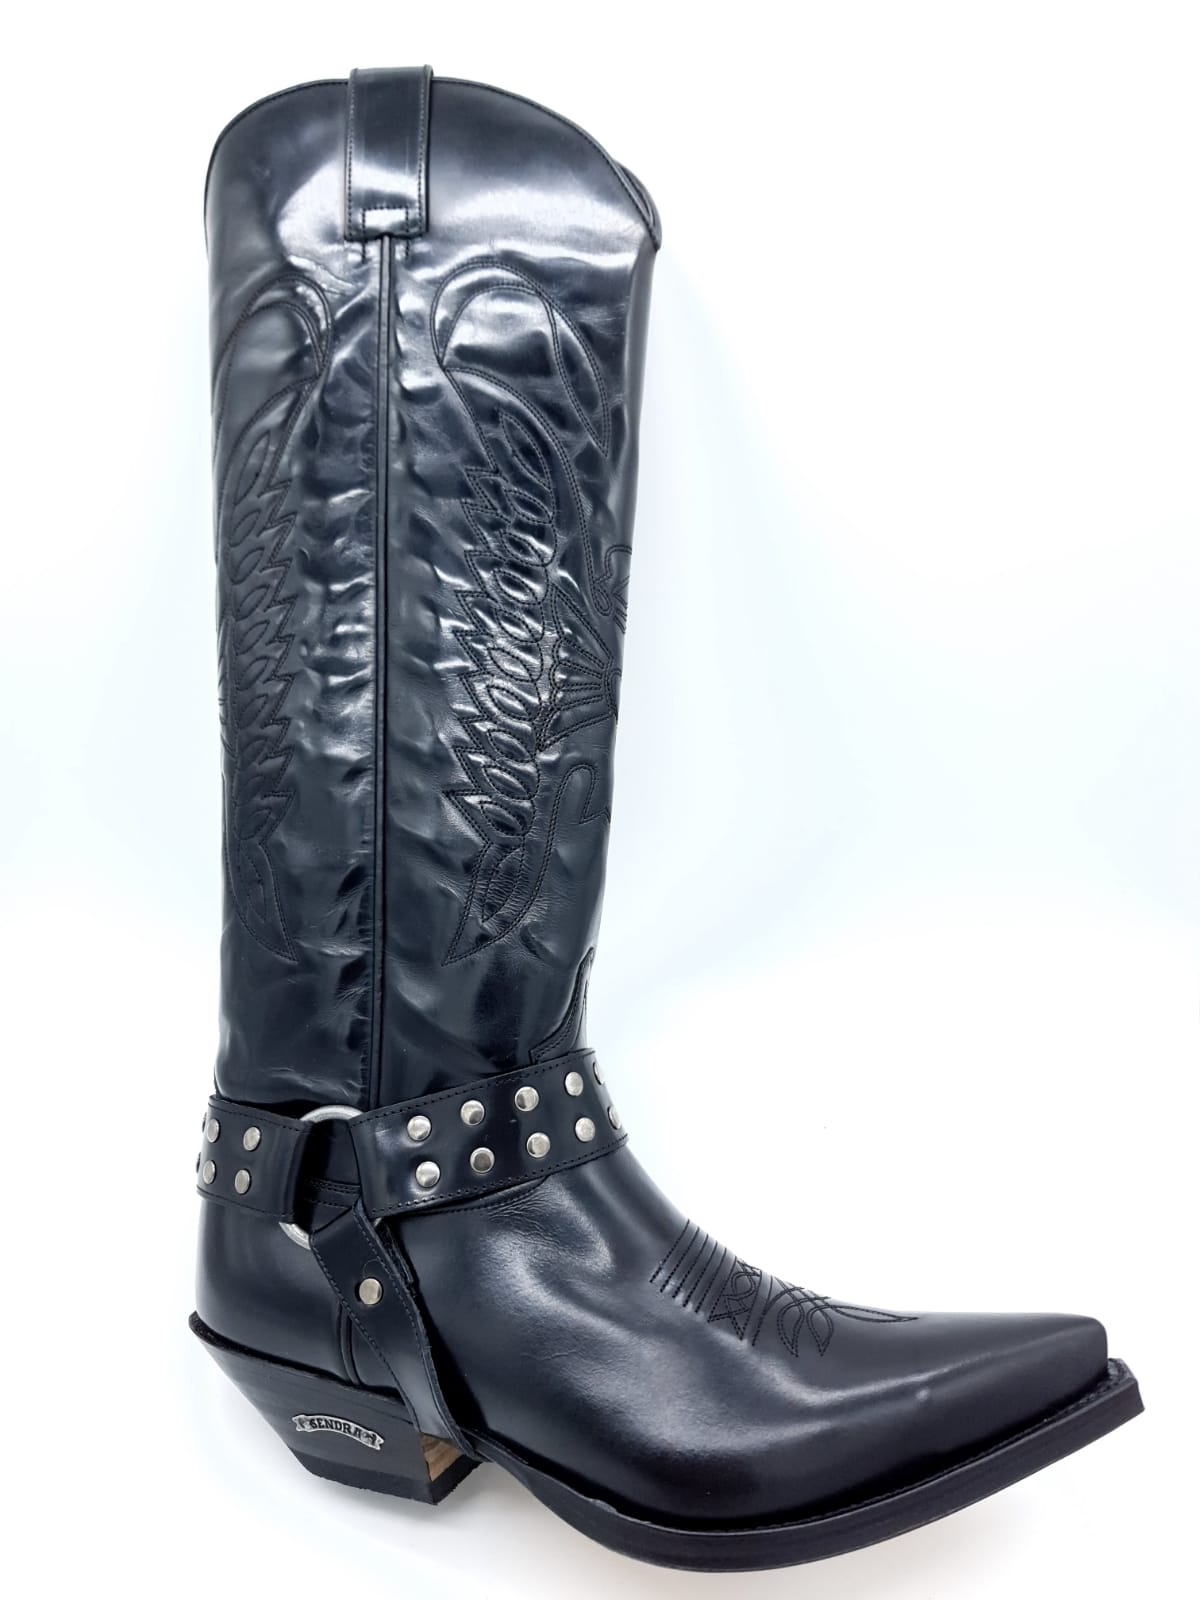 Sendra Boots 7167 High Shaft Cowboy Boots Black Real Leather